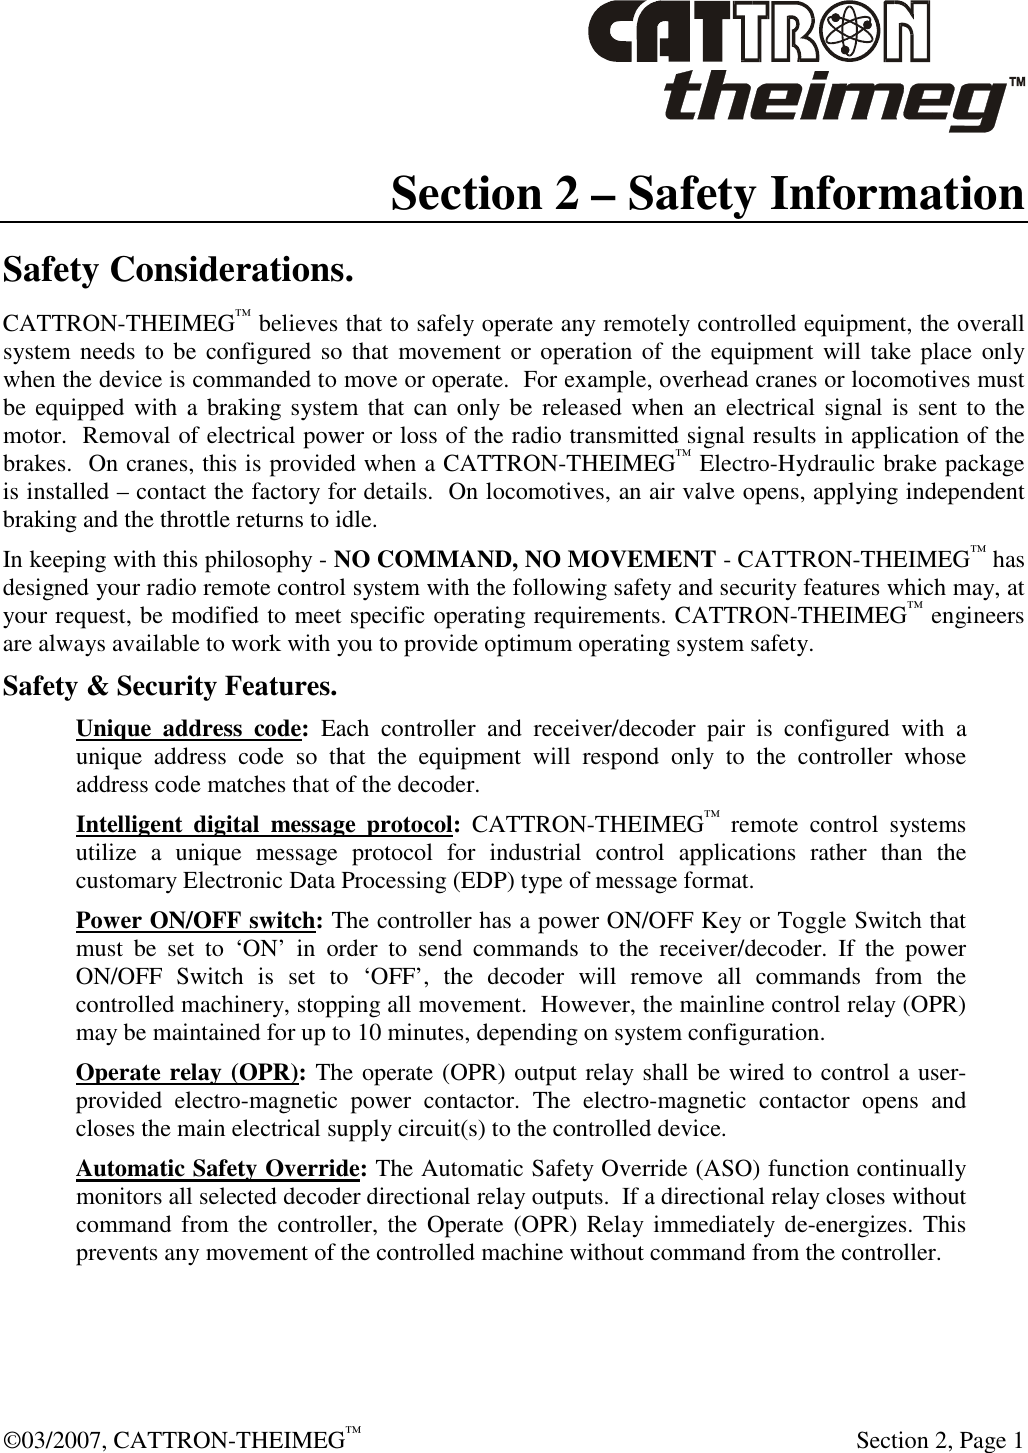  ©03/2007, CATTRON-THEIMEG™     Section 2, Page 1 Section 2 – Safety Information Safety Considerations. CATTRON-THEIMEG™ believes that to safely operate any remotely controlled equipment, the overall system needs to be configured so that movement  or operation of the equipment will take place  only when the device is commanded to move or operate.  For example, overhead cranes or locomotives must be equipped  with a braking system  that can only be  released when an electrical signal is  sent to the motor.  Removal of electrical power or loss of the radio transmitted signal results in application of the brakes.  On cranes, this is provided when a CATTRON-THEIMEG™ Electro-Hydraulic brake package is installed – contact the factory for details.  On locomotives, an air valve opens, applying independent braking and the throttle returns to idle.  In keeping with this philosophy - NO COMMAND, NO MOVEMENT - CATTRON-THEIMEG™ has designed your radio remote control system with the following safety and security features which may, at your request, be modified to meet specific operating requirements. CATTRON-THEIMEG™ engineers are always available to work with you to provide optimum operating system safety.  Safety &amp; Security Features. Unique  address  code:  Each  controller  and  receiver/decoder  pair  is  configured  with  a unique  address  code  so  that  the  equipment  will  respond  only  to  the  controller  whose address code matches that of the decoder. Intelligent  digital  message  protocol:  CATTRON-THEIMEG™  remote  control  systems utilize  a  unique  message  protocol  for  industrial  control  applications  rather  than  the customary Electronic Data Processing (EDP) type of message format. Power ON/OFF switch: The controller has a power ON/OFF Key or Toggle Switch that must  be  set  to  ‘ON’  in  order  to  send  commands  to  the  receiver/decoder.  If  the  power ON/OFF  Switch  is  set  to  ‘OFF’,  the  decoder  will  remove  all  commands  from  the controlled machinery, stopping all movement.  However, the mainline control relay (OPR) may be maintained for up to 10 minutes, depending on system configuration. Operate relay (OPR): The operate (OPR) output relay shall be wired to control a user-provided  electro-magnetic  power  contactor.  The  electro-magnetic  contactor  opens  and closes the main electrical supply circuit(s) to the controlled device. Automatic Safety Override: The Automatic Safety Override (ASO) function continually monitors all selected decoder directional relay outputs.  If a directional relay closes without command from  the  controller, the  Operate (OPR) Relay immediately de-energizes. This prevents any movement of the controlled machine without command from the controller.  